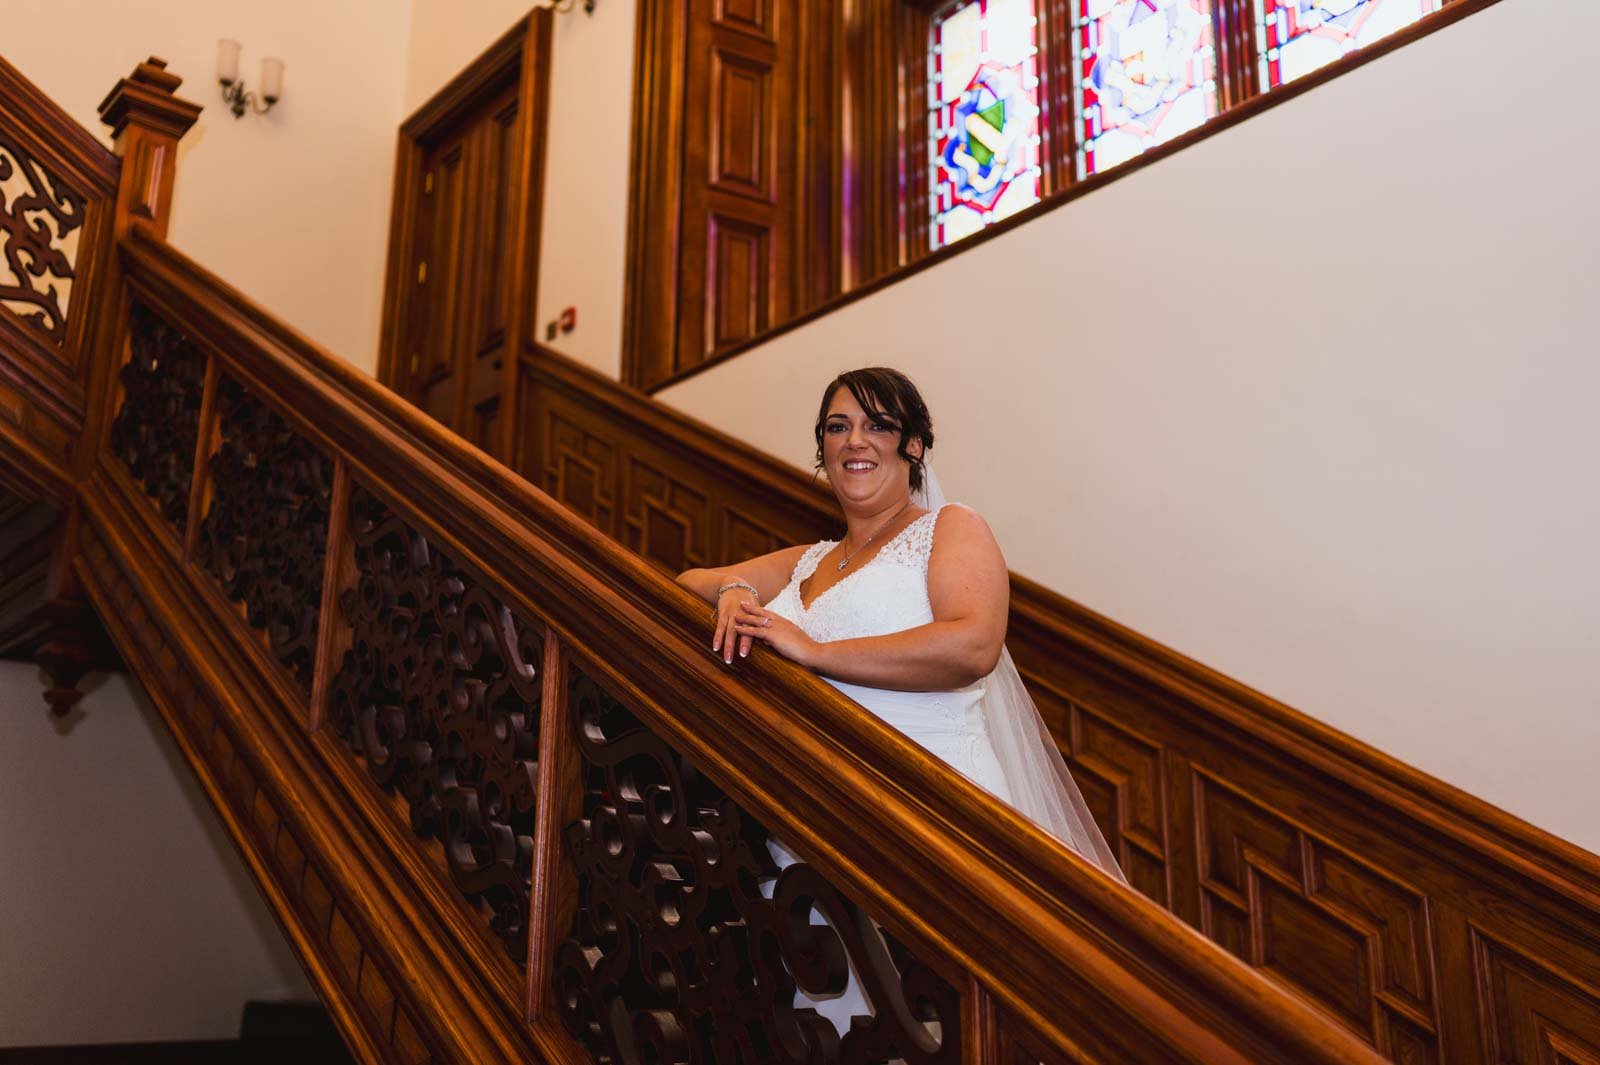  Bride leaning against wooden bannister on stairs within building showing some windows. 